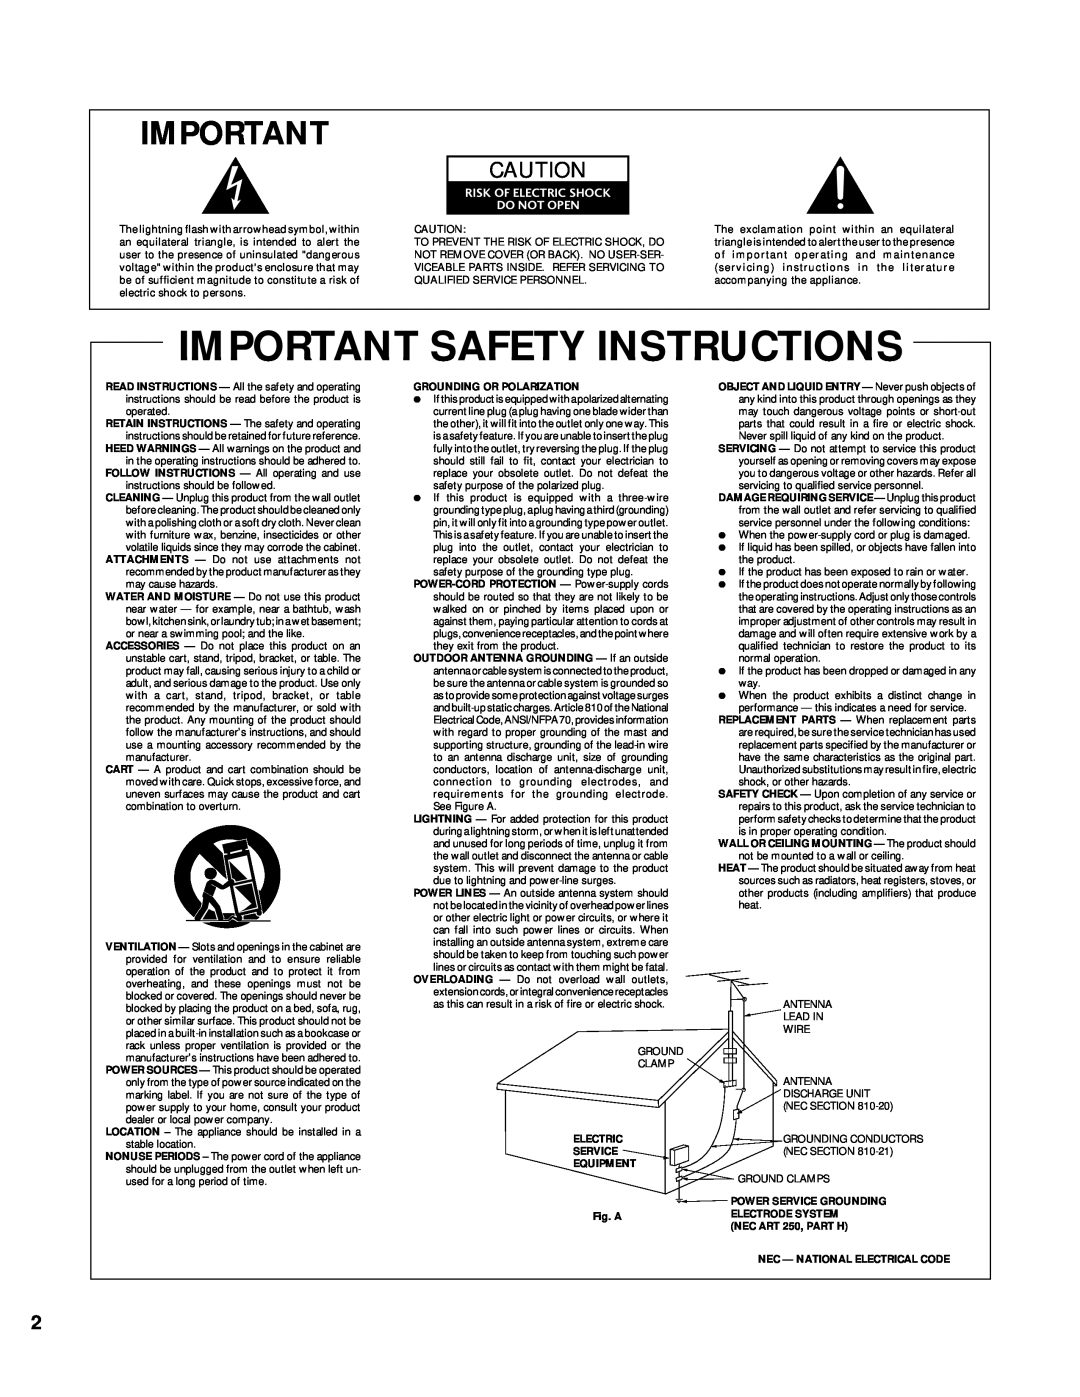 Pioneer PDR-509 manual Important Safety Instructions, Risk Of Electric Shock Do Not Open 